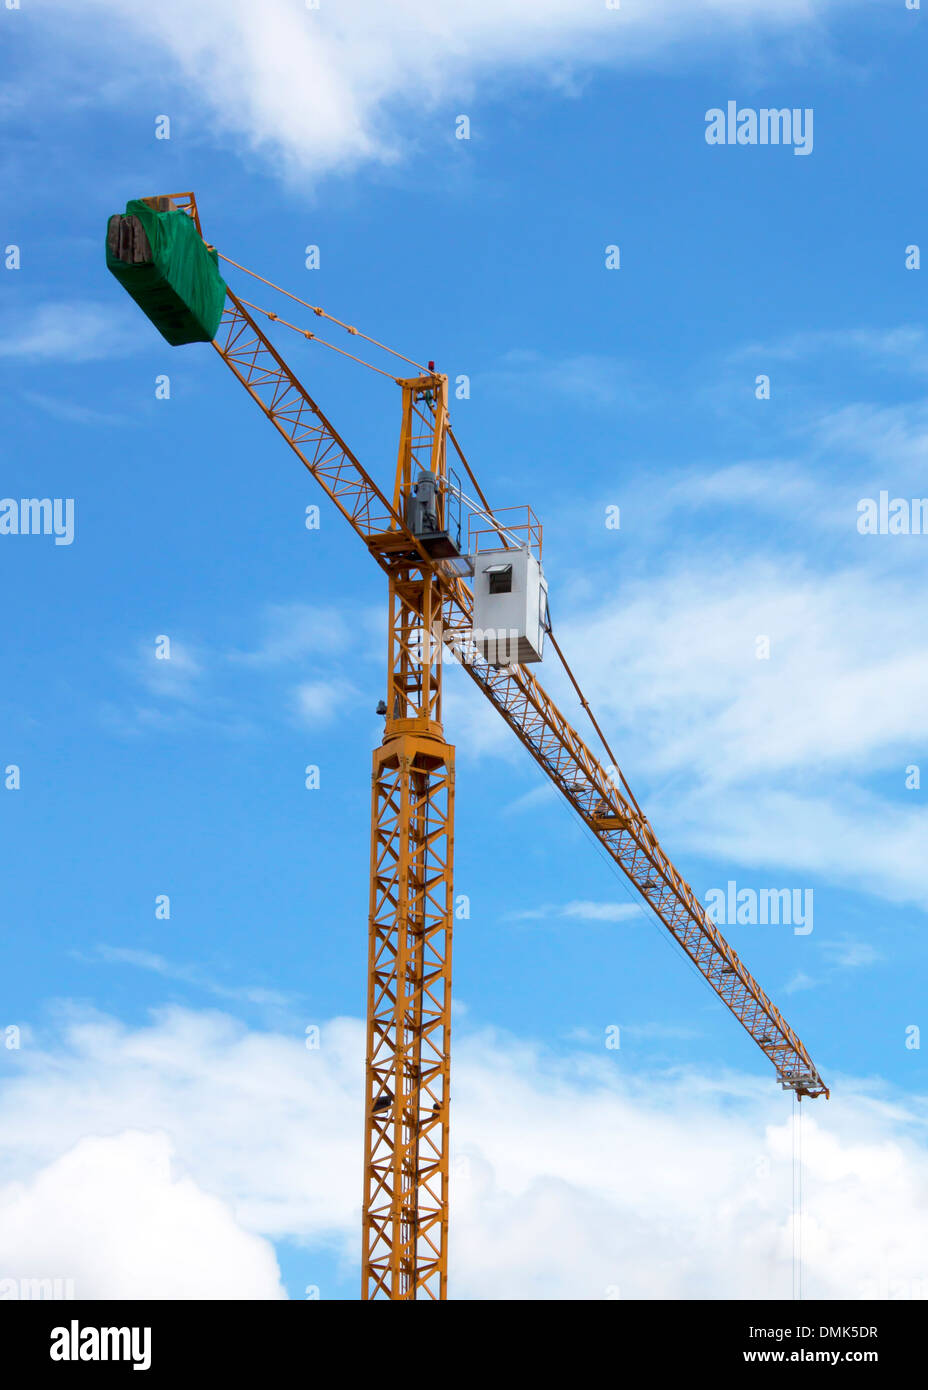 Sky cranes lifting up to high construction Stock Photo